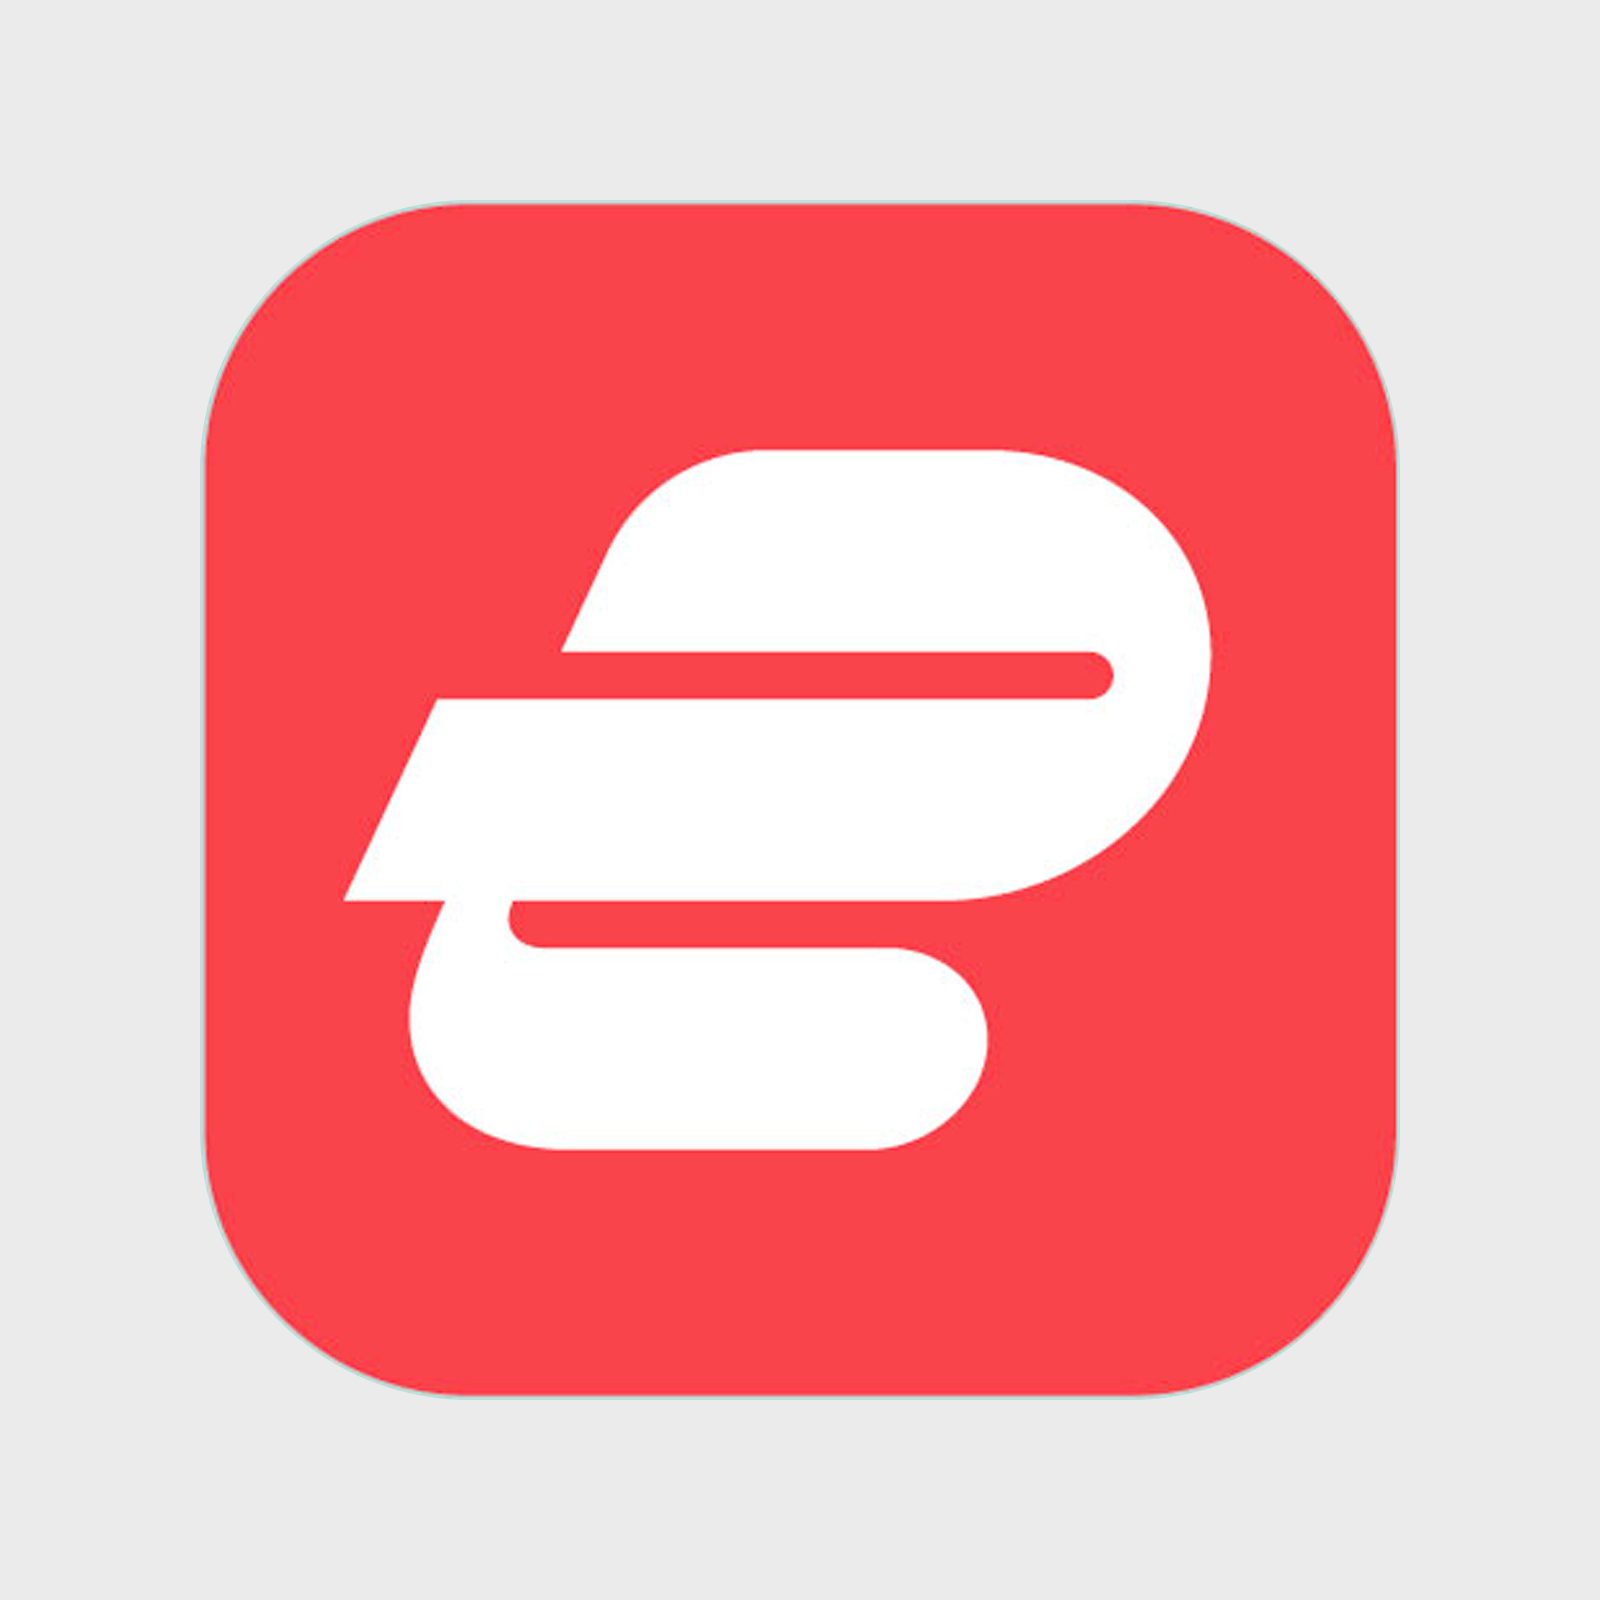 <p class=""><strong>Available on: </strong>iOS and Android</p> <p class=""><strong>Cost:</strong> Starts at $8.32 per month</p> <p>Another VPN provider highly recommended by experts, ExpressVPN costs a bit more than other options but generally supplies a faster connection. This security app also has the edge for a feature called split tunneling, allowing users to choose which apps use VPN and which access the Internet directly. For example, you might want to stream <em>Ozark</em> from Netflix as usual but have ExpressVPN provide the connection for your work email or for Safari as you <a href="https://www.rd.com/article/anonymous-search-without-tracking/" rel="noopener noreferrer">browse the Internet anonymously</a>. The app works on all devices, from your smartphone and computer to your smart TV.</p> <p class="listicle-page__cta-button-shop"><a class="shop-btn" href="https://www.expressvpn.com/order">Download Now</a></p>